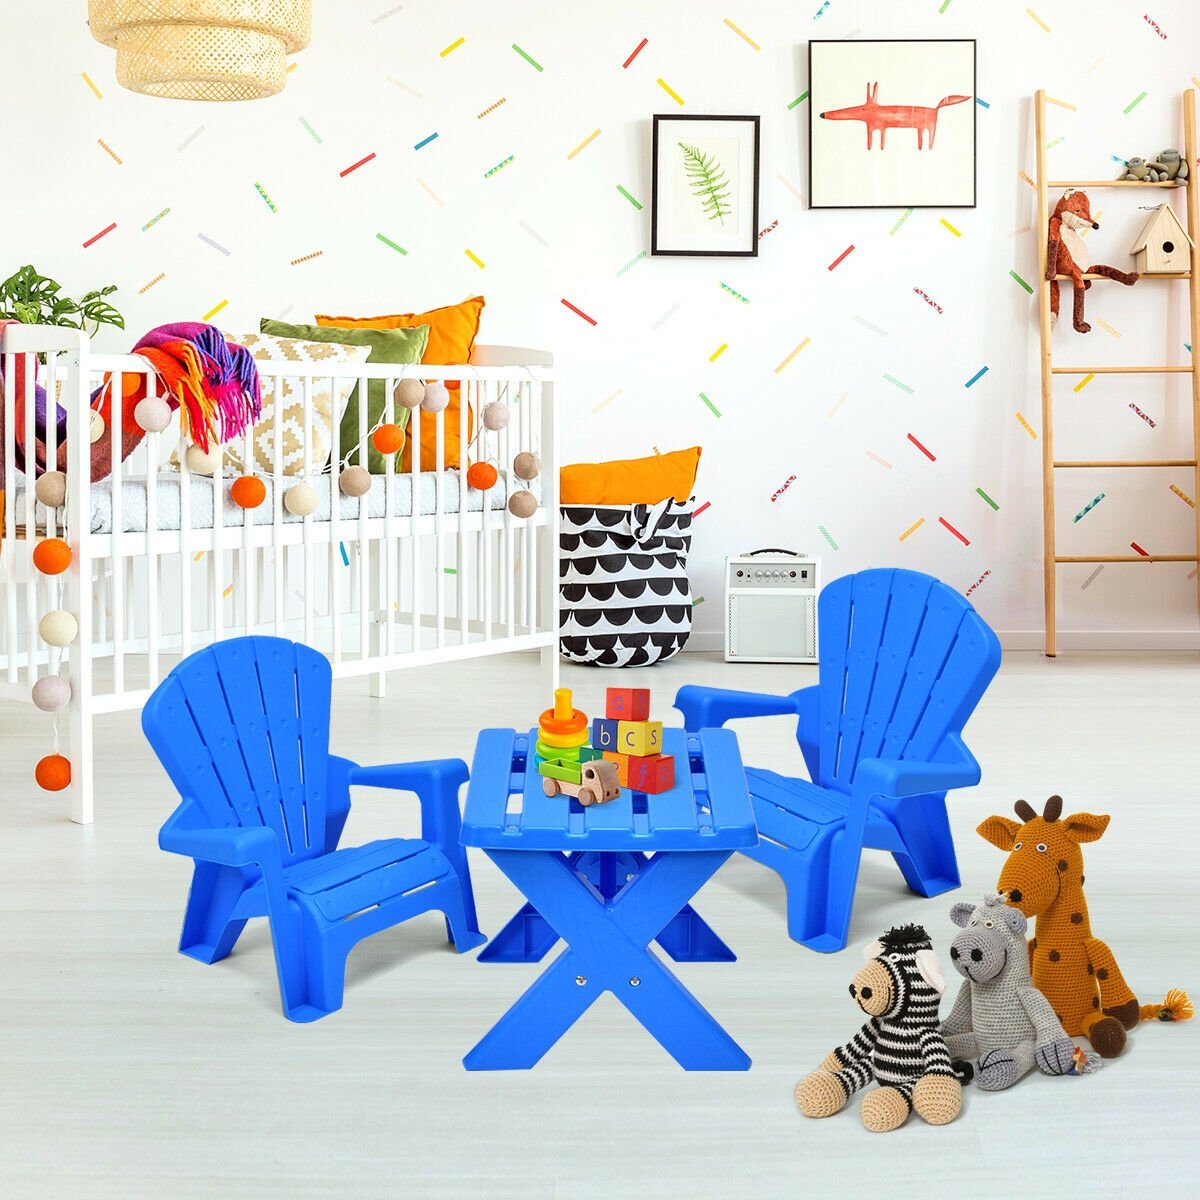 3-Piece Plastic Children Table Chair Set, Blue - Gallery Canada